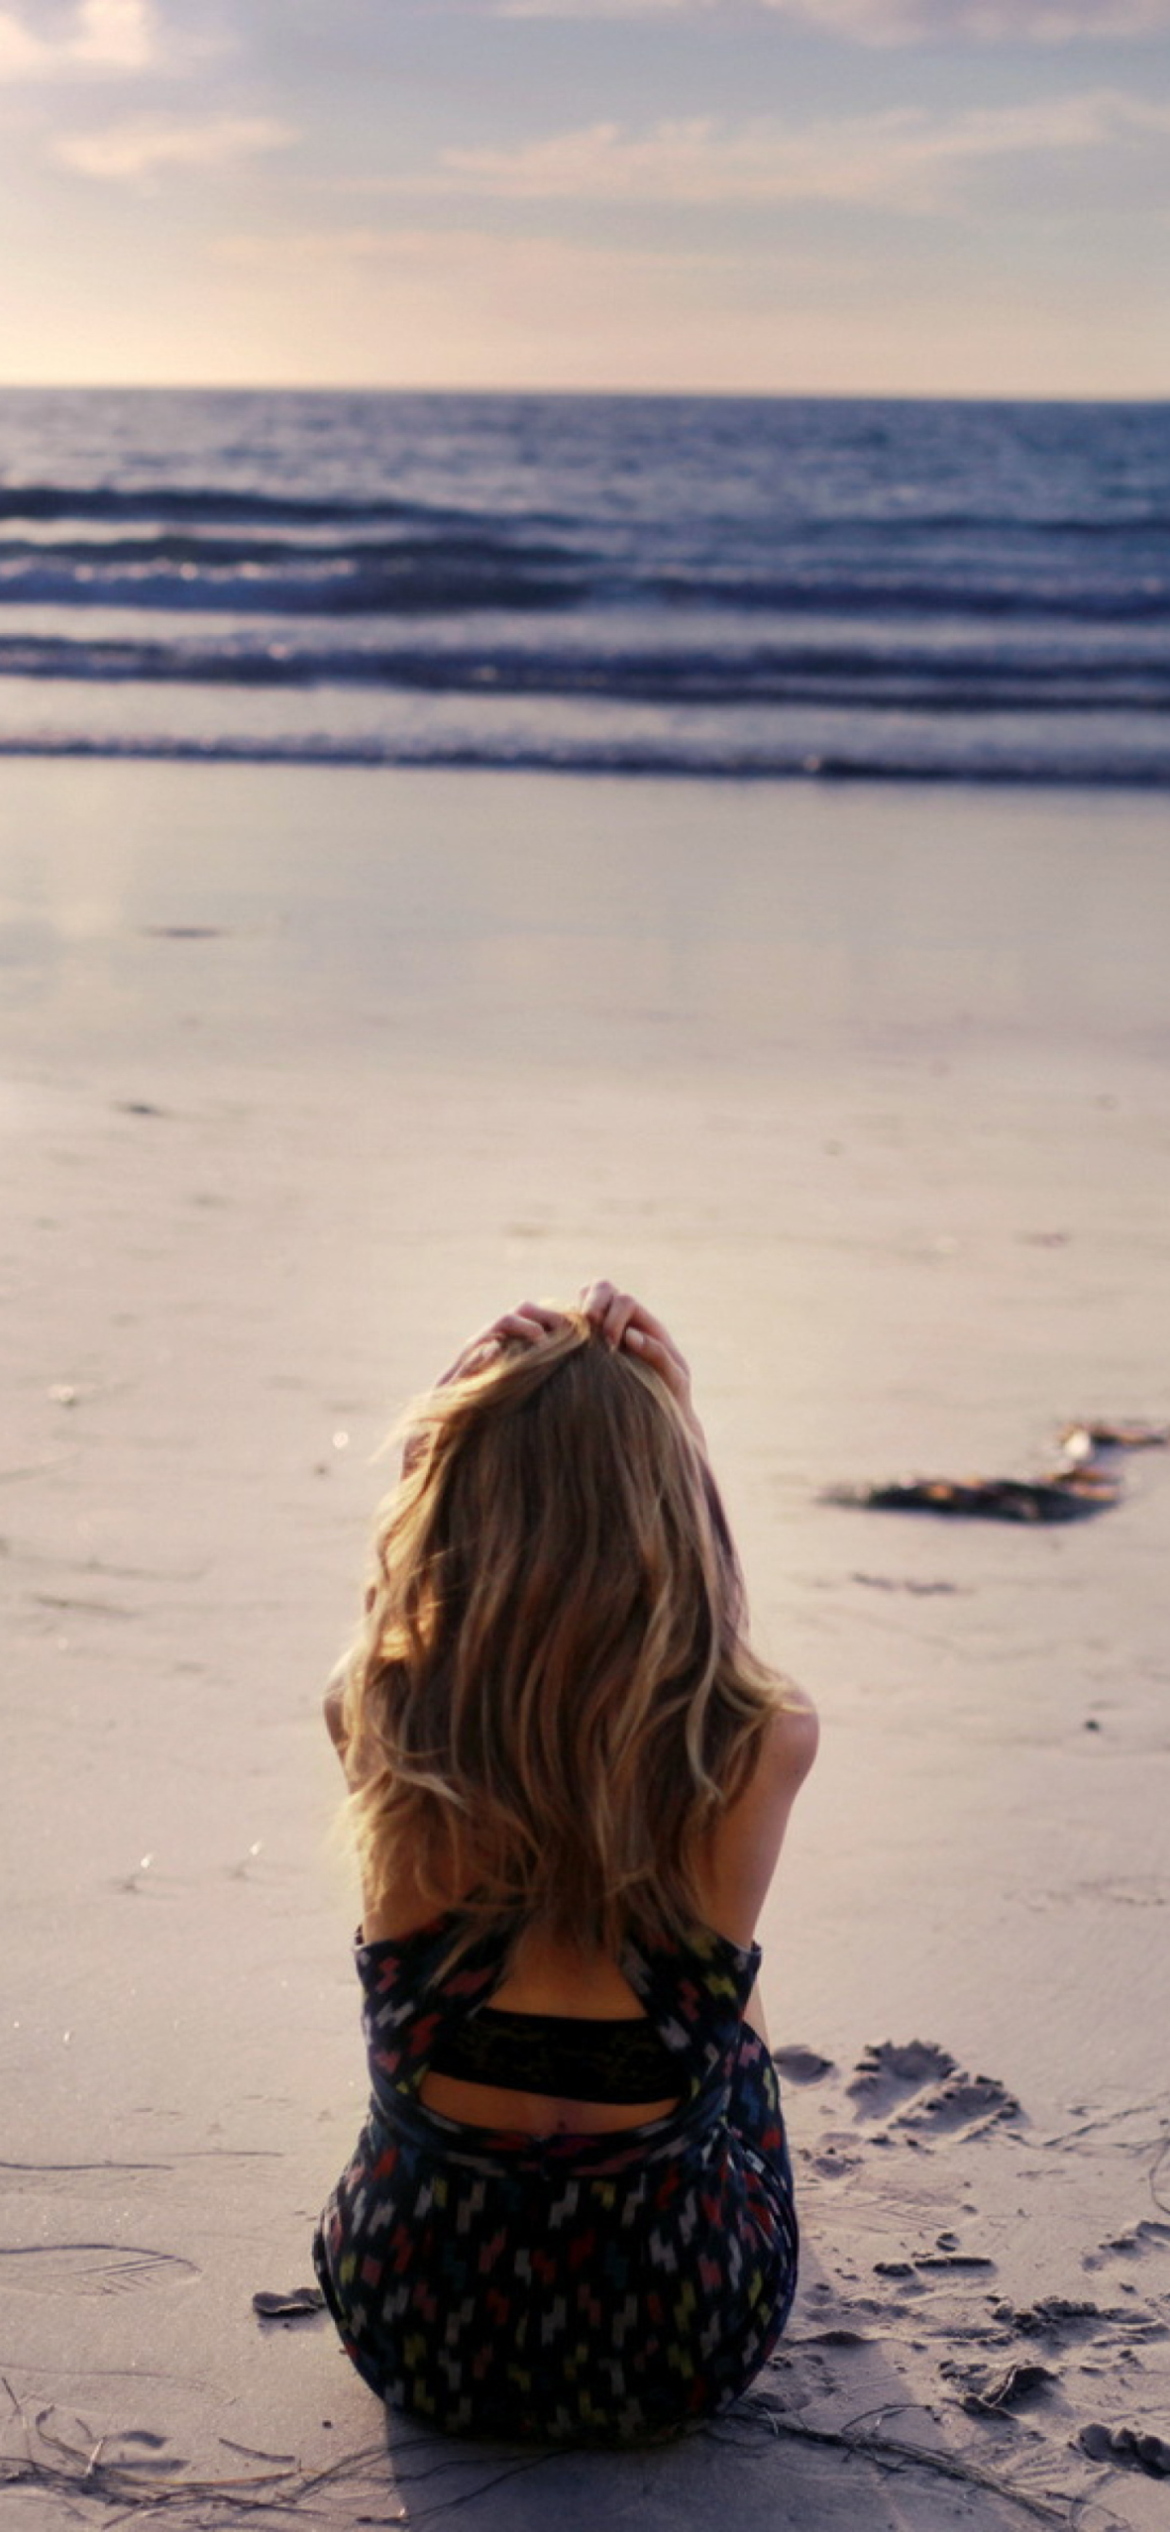 Lonely Girl On Beautiful Beach wallpaper 1170x2532